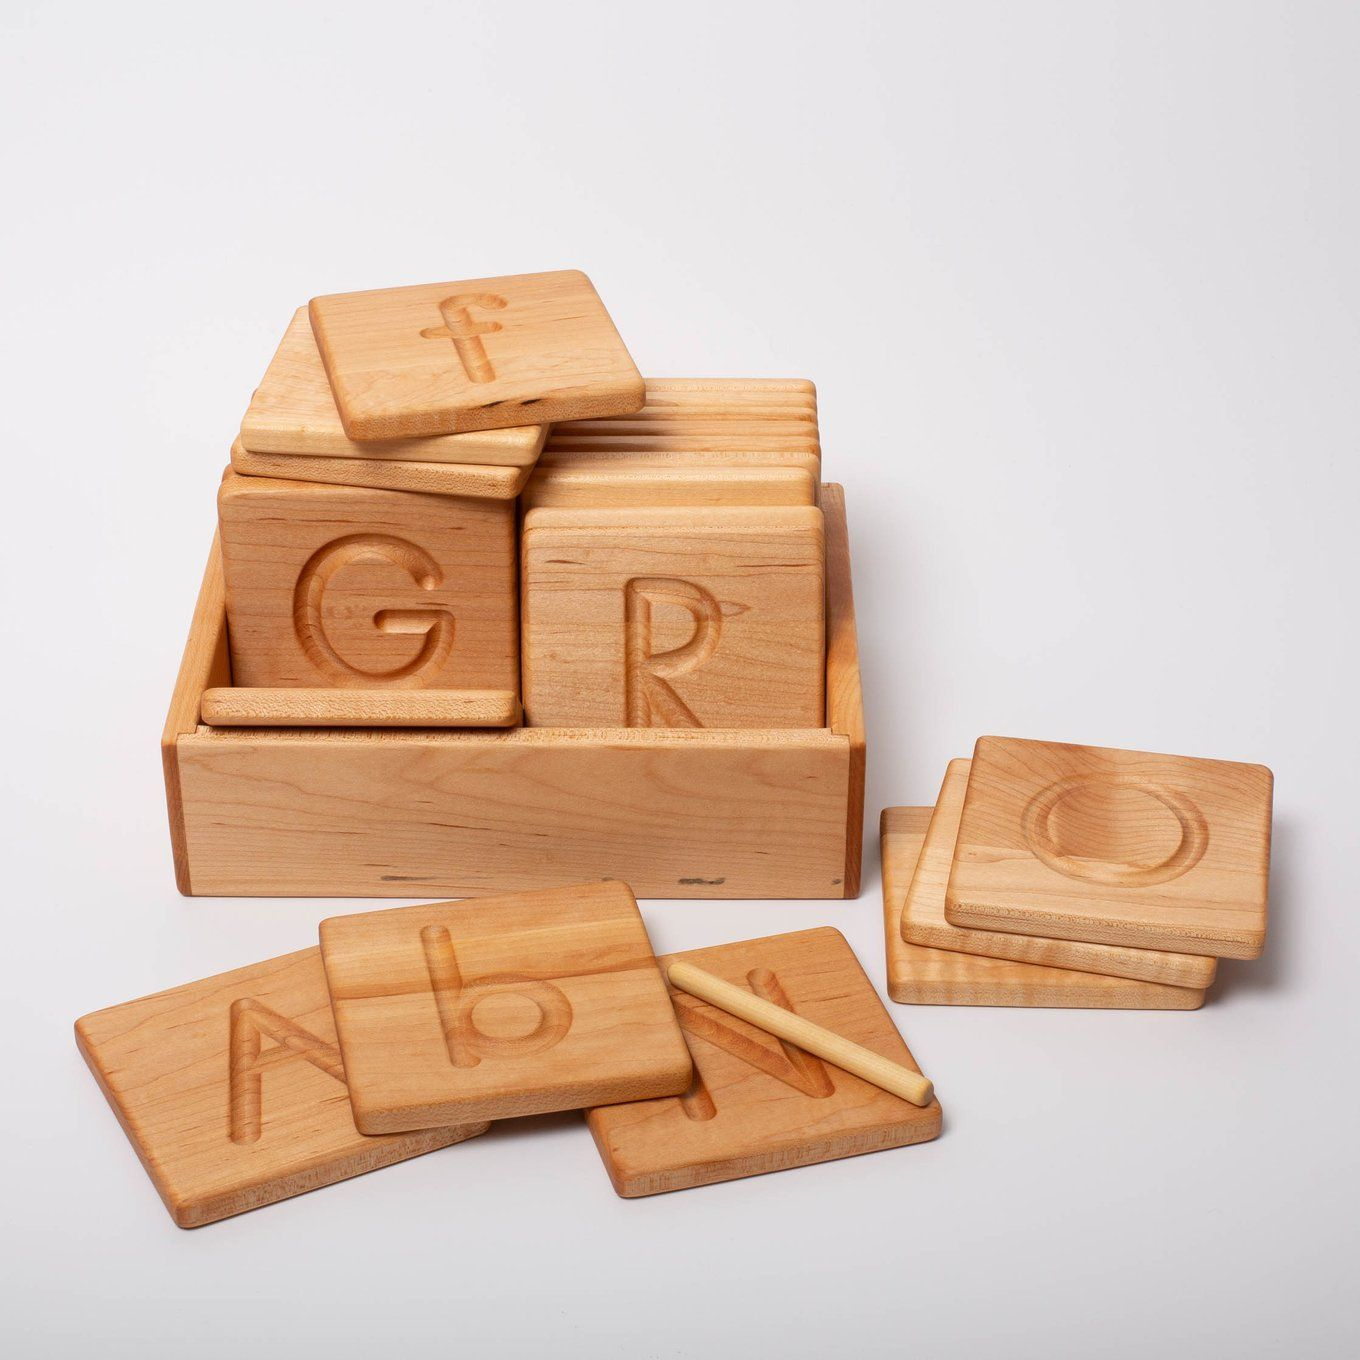 Reversible Wooden Abc Cards | Printed | Abc Cards, Wooden regarding Tracing Letters On Wood